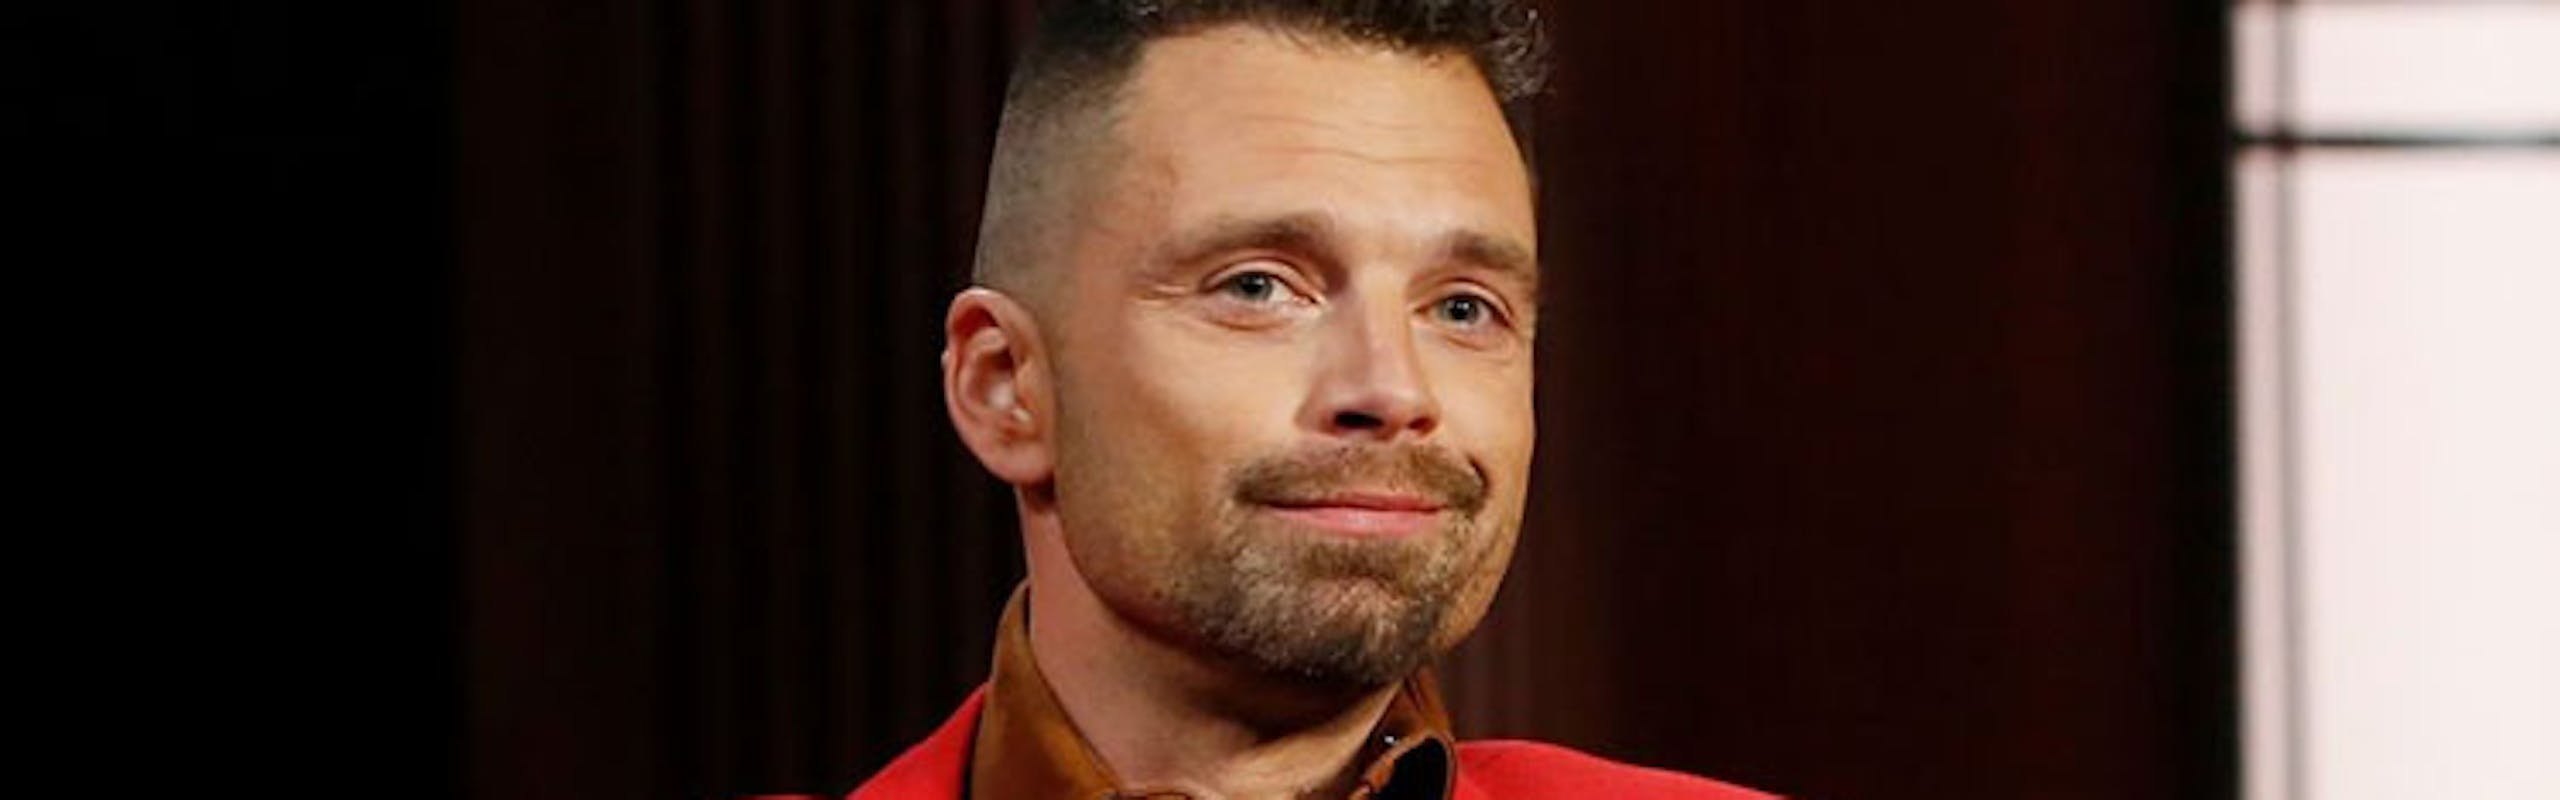 Sebastian stan in a red matching suit with a brown leather shirt underneath sitting with his hands crossed on a grey chair in front of a black wall